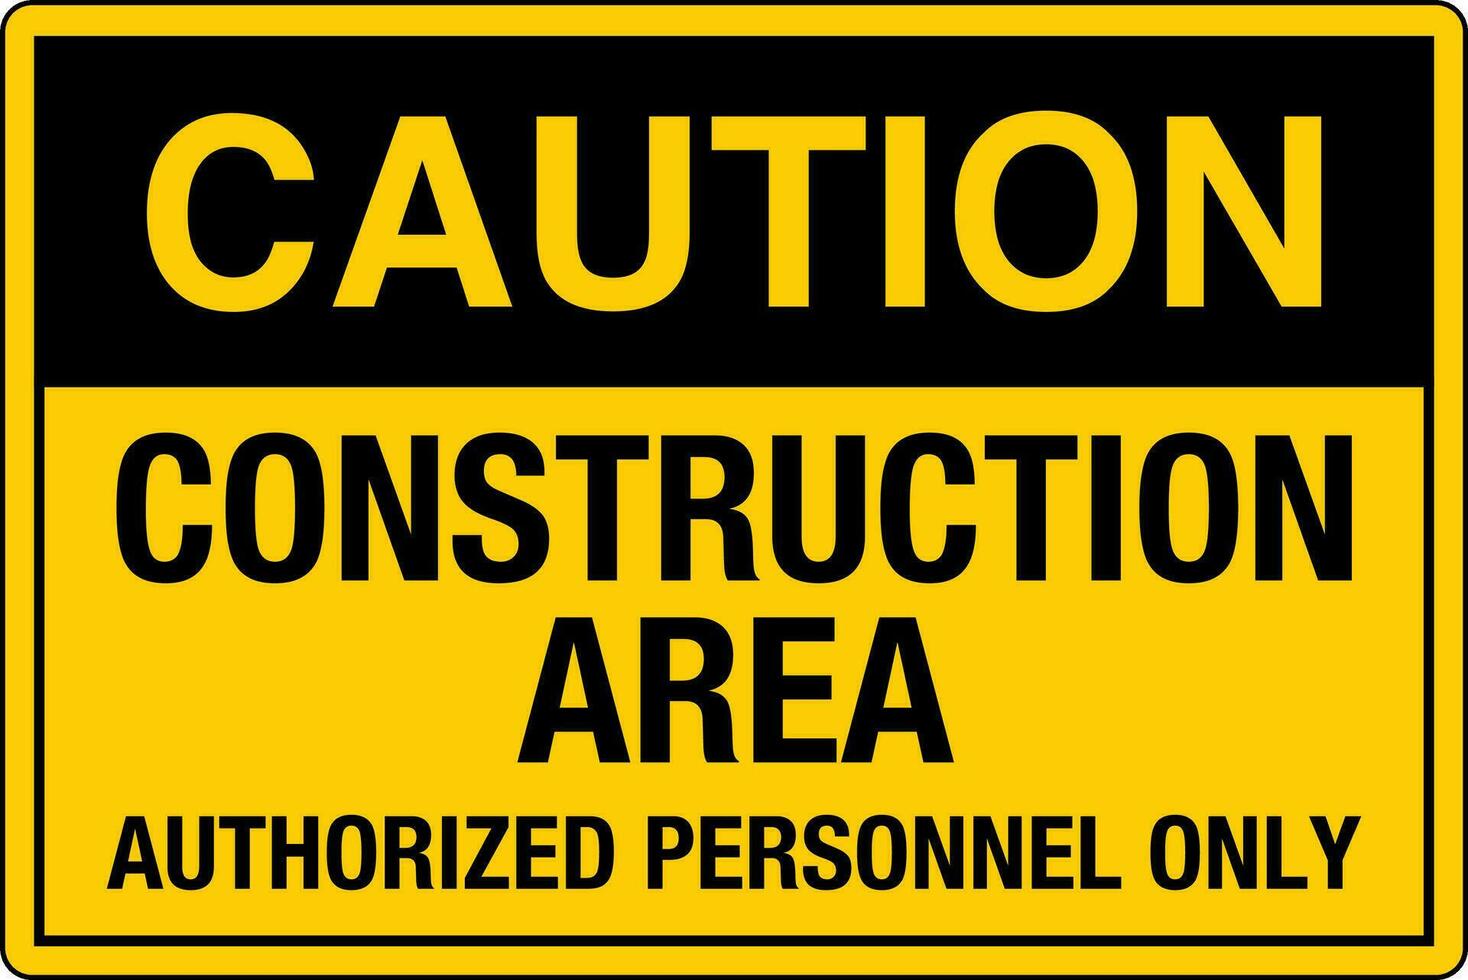 OSHA standards symbols registered workplace safety sign danger caution warning Construction Area Authorized Personnel Only vector